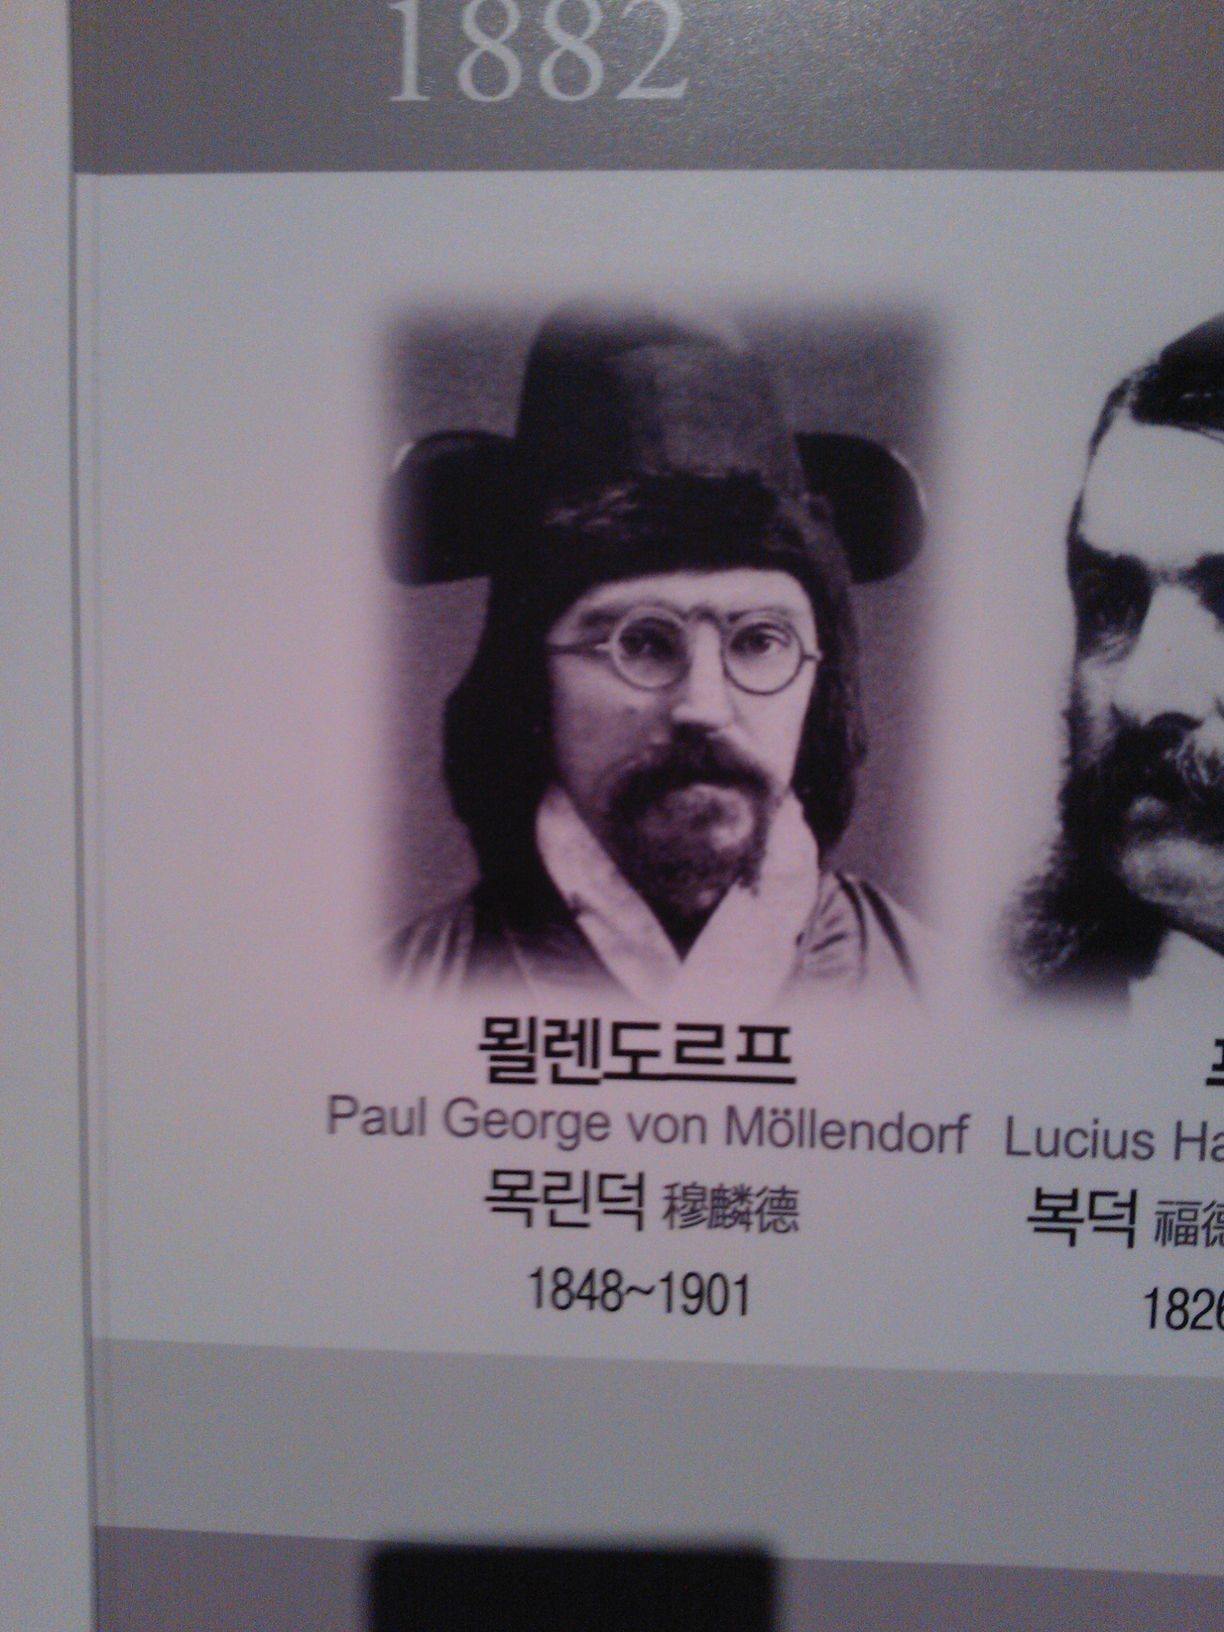 The first German diplomat in Seoul. He arrived 1882 and was the first official western advisor for the Korean government.